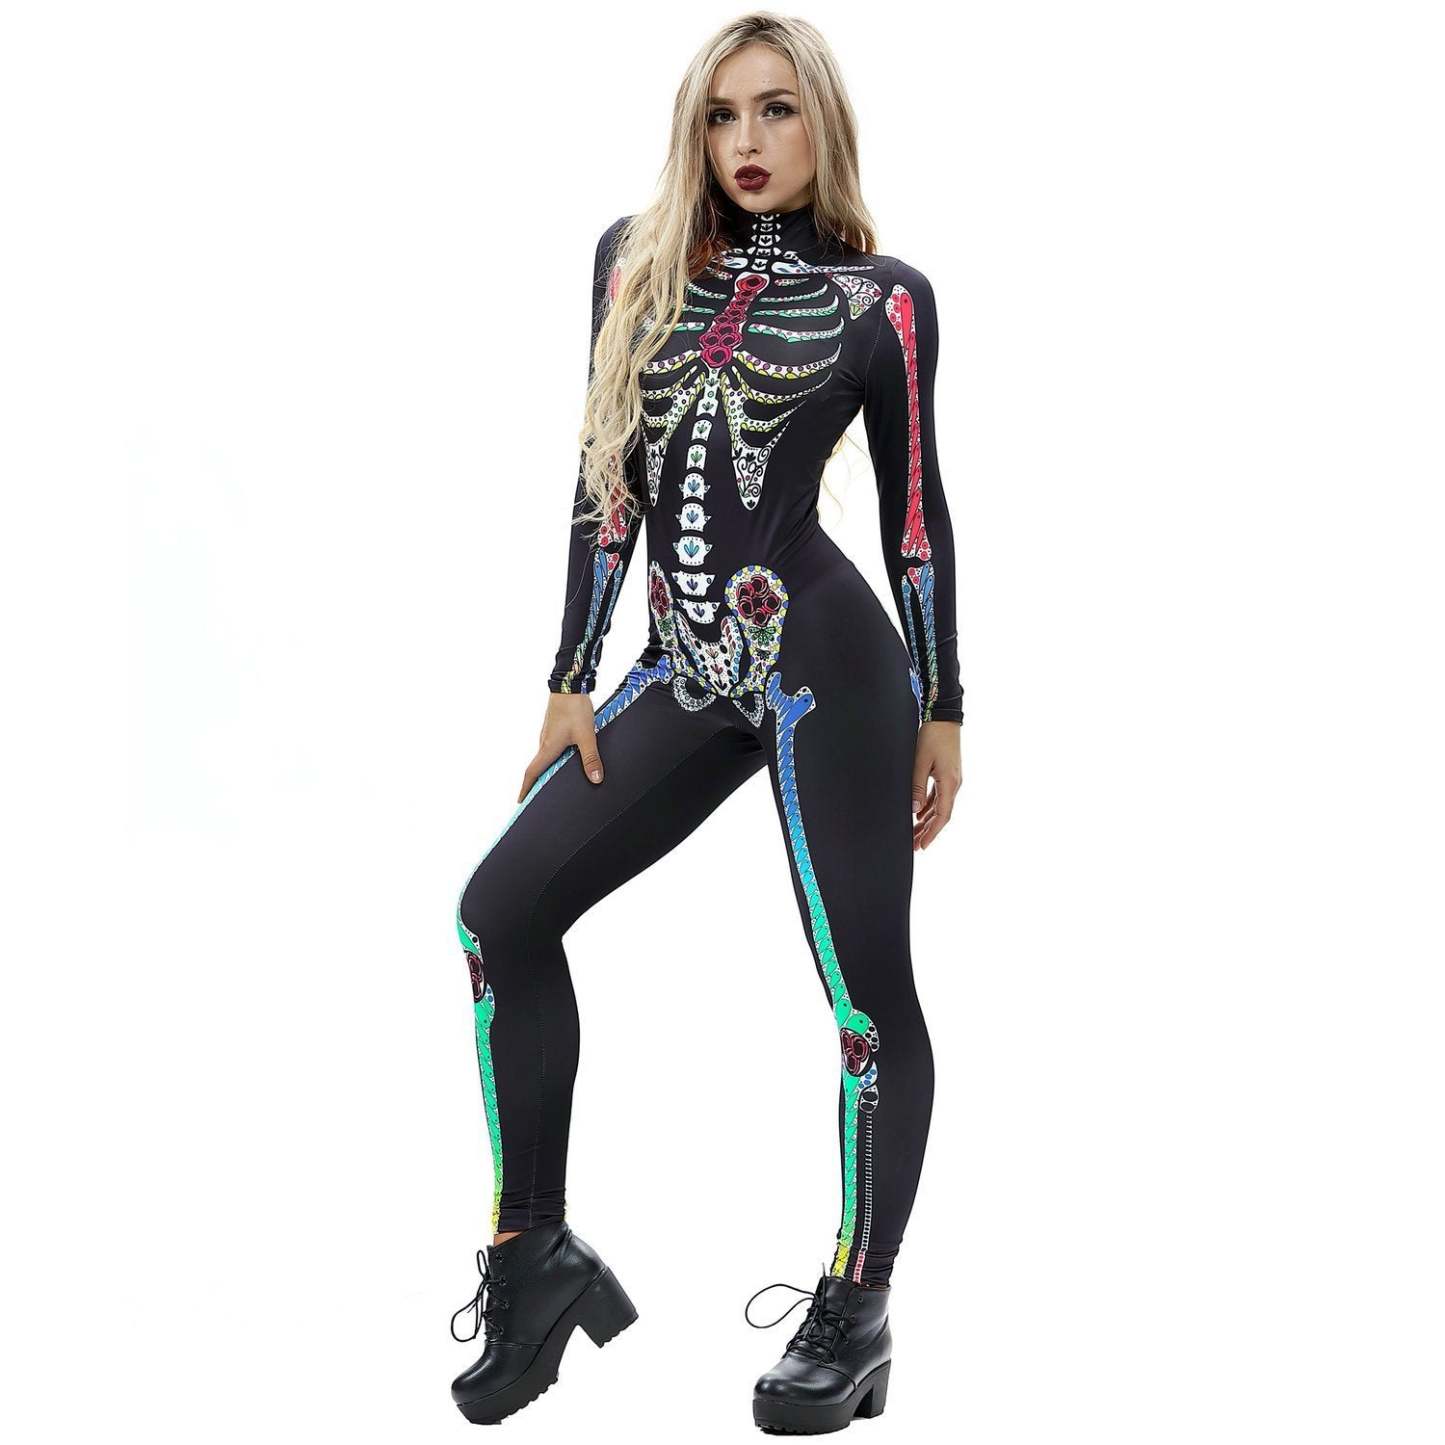 Colorful Skull Print Cosplay Halloween Costume Jumpsuit for Women